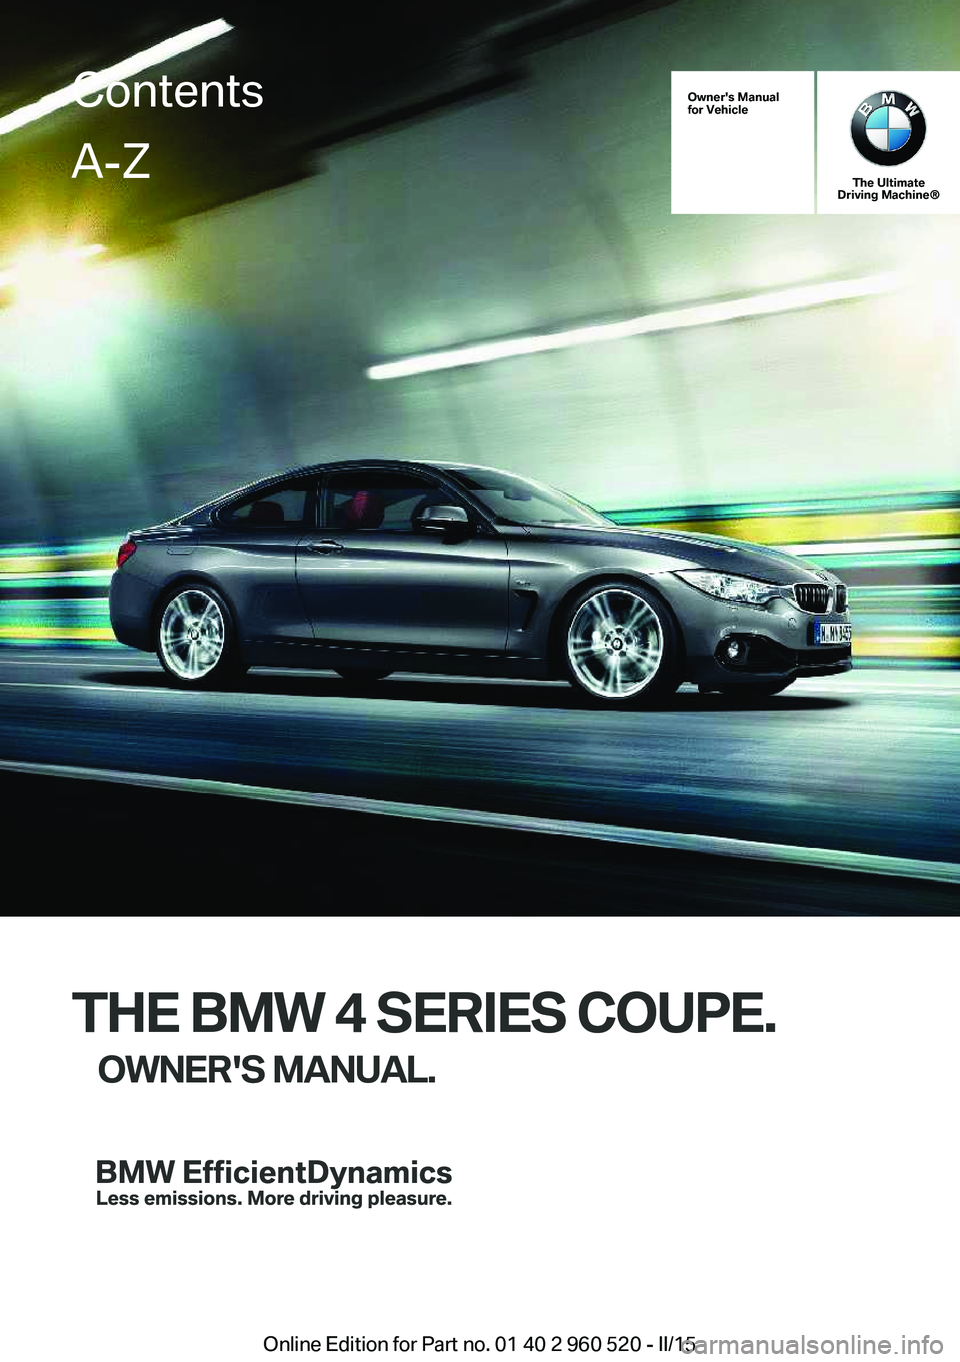 BMW 428 COUPE 2015  Owners Manual Owner's Manual
for Vehicle
The Ultimate
Driving Machine®
THE BMW 4 SERIES COUPE.
OWNER'S MANUAL.
ContentsA-Z
Online Edition for Part no. 01 40 2 960 520 - II/15   